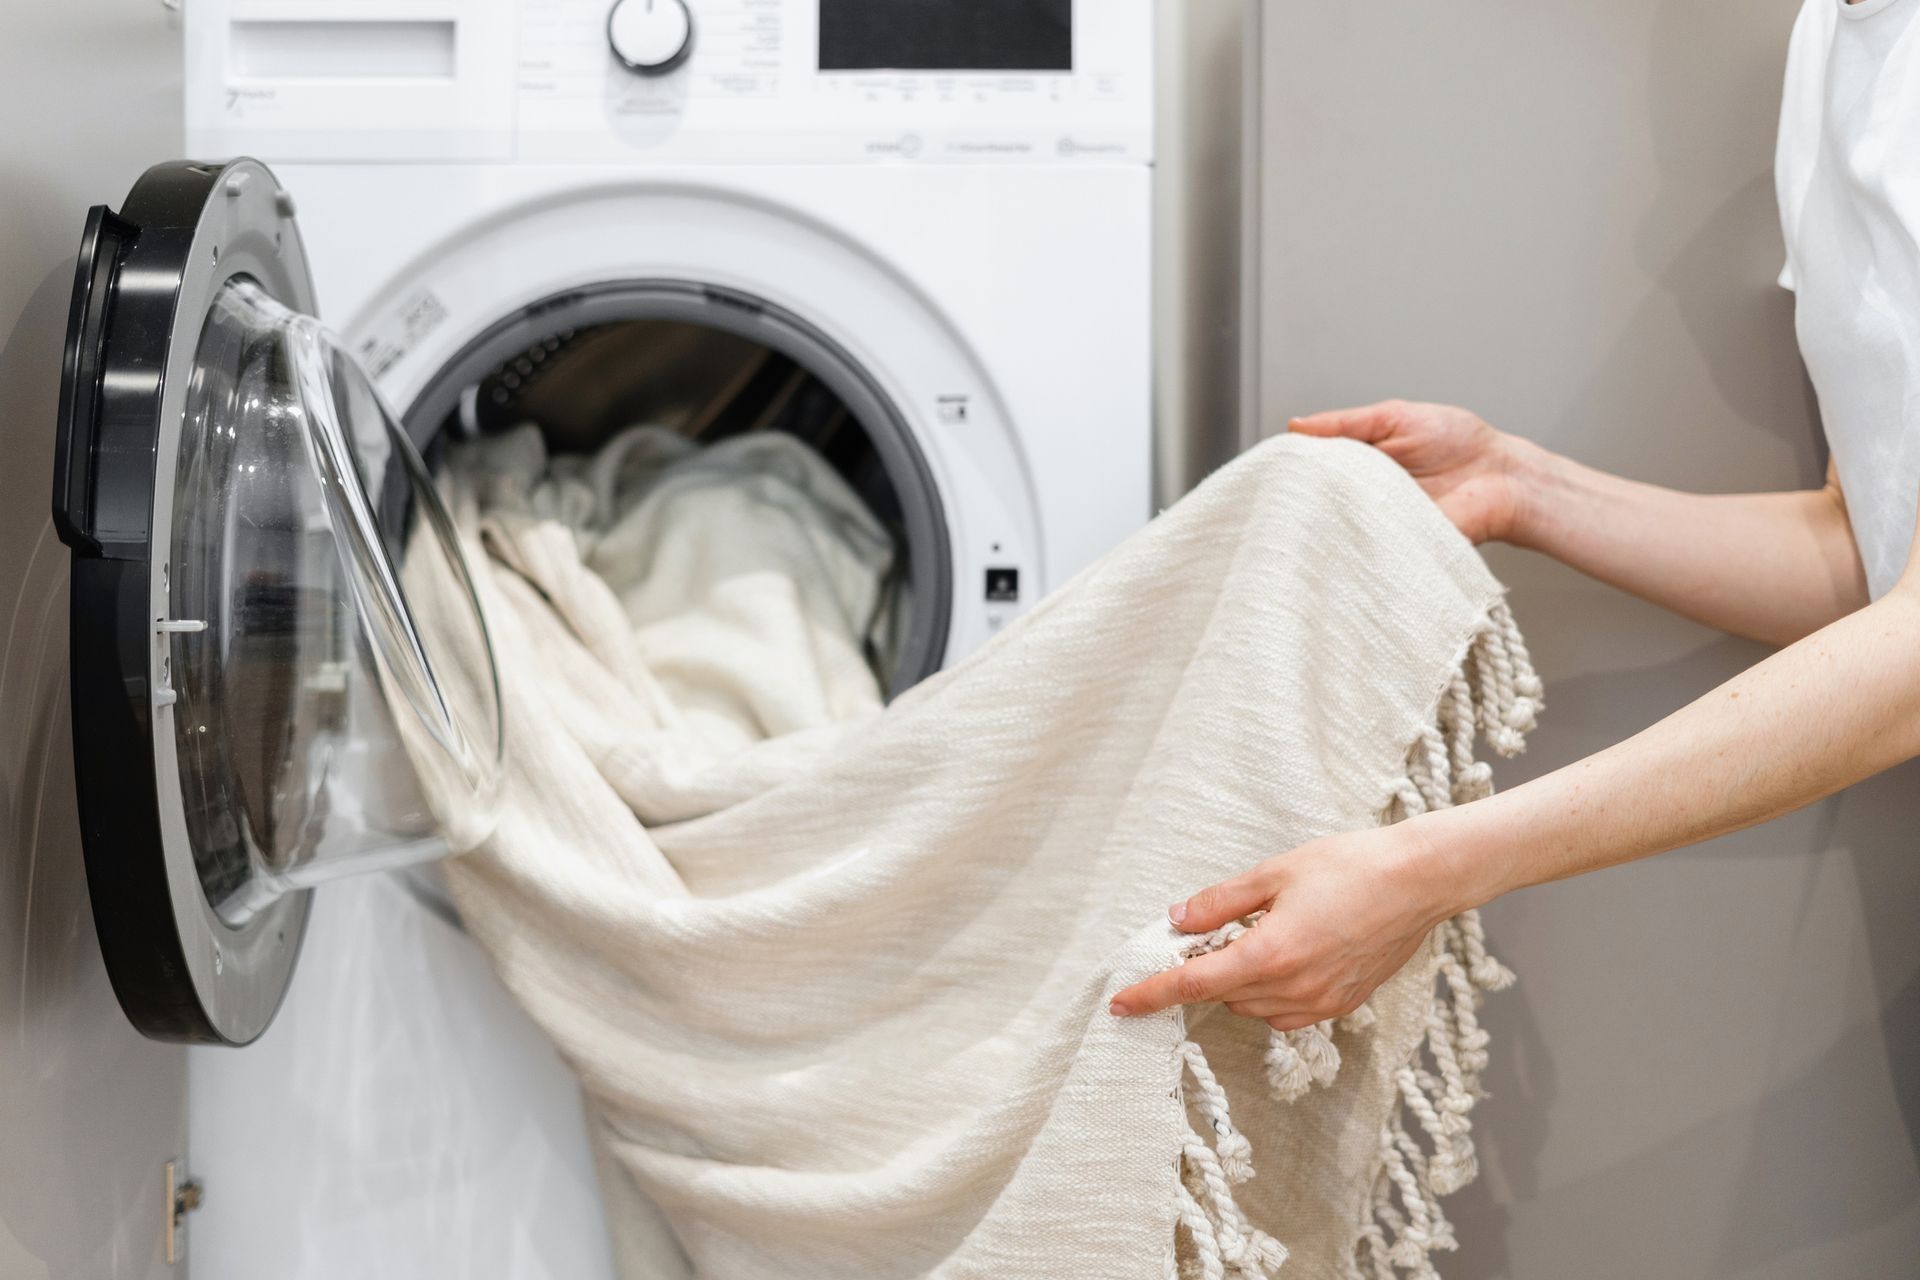 a person is putting a blanket into a washing machine